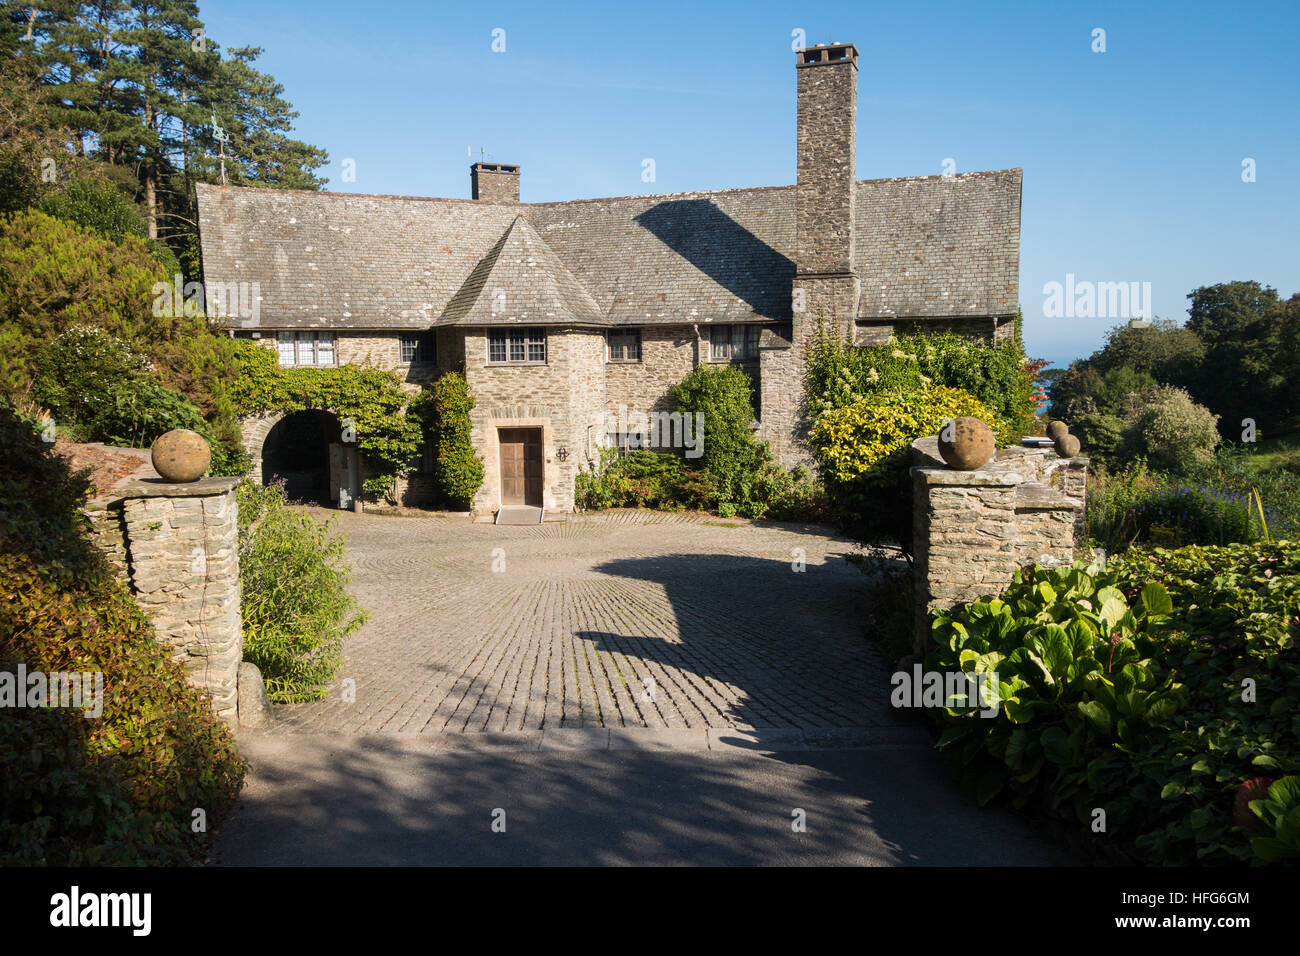 Country house and entrance in a very picturesque setting with courtyard and entrance. Stock Photo